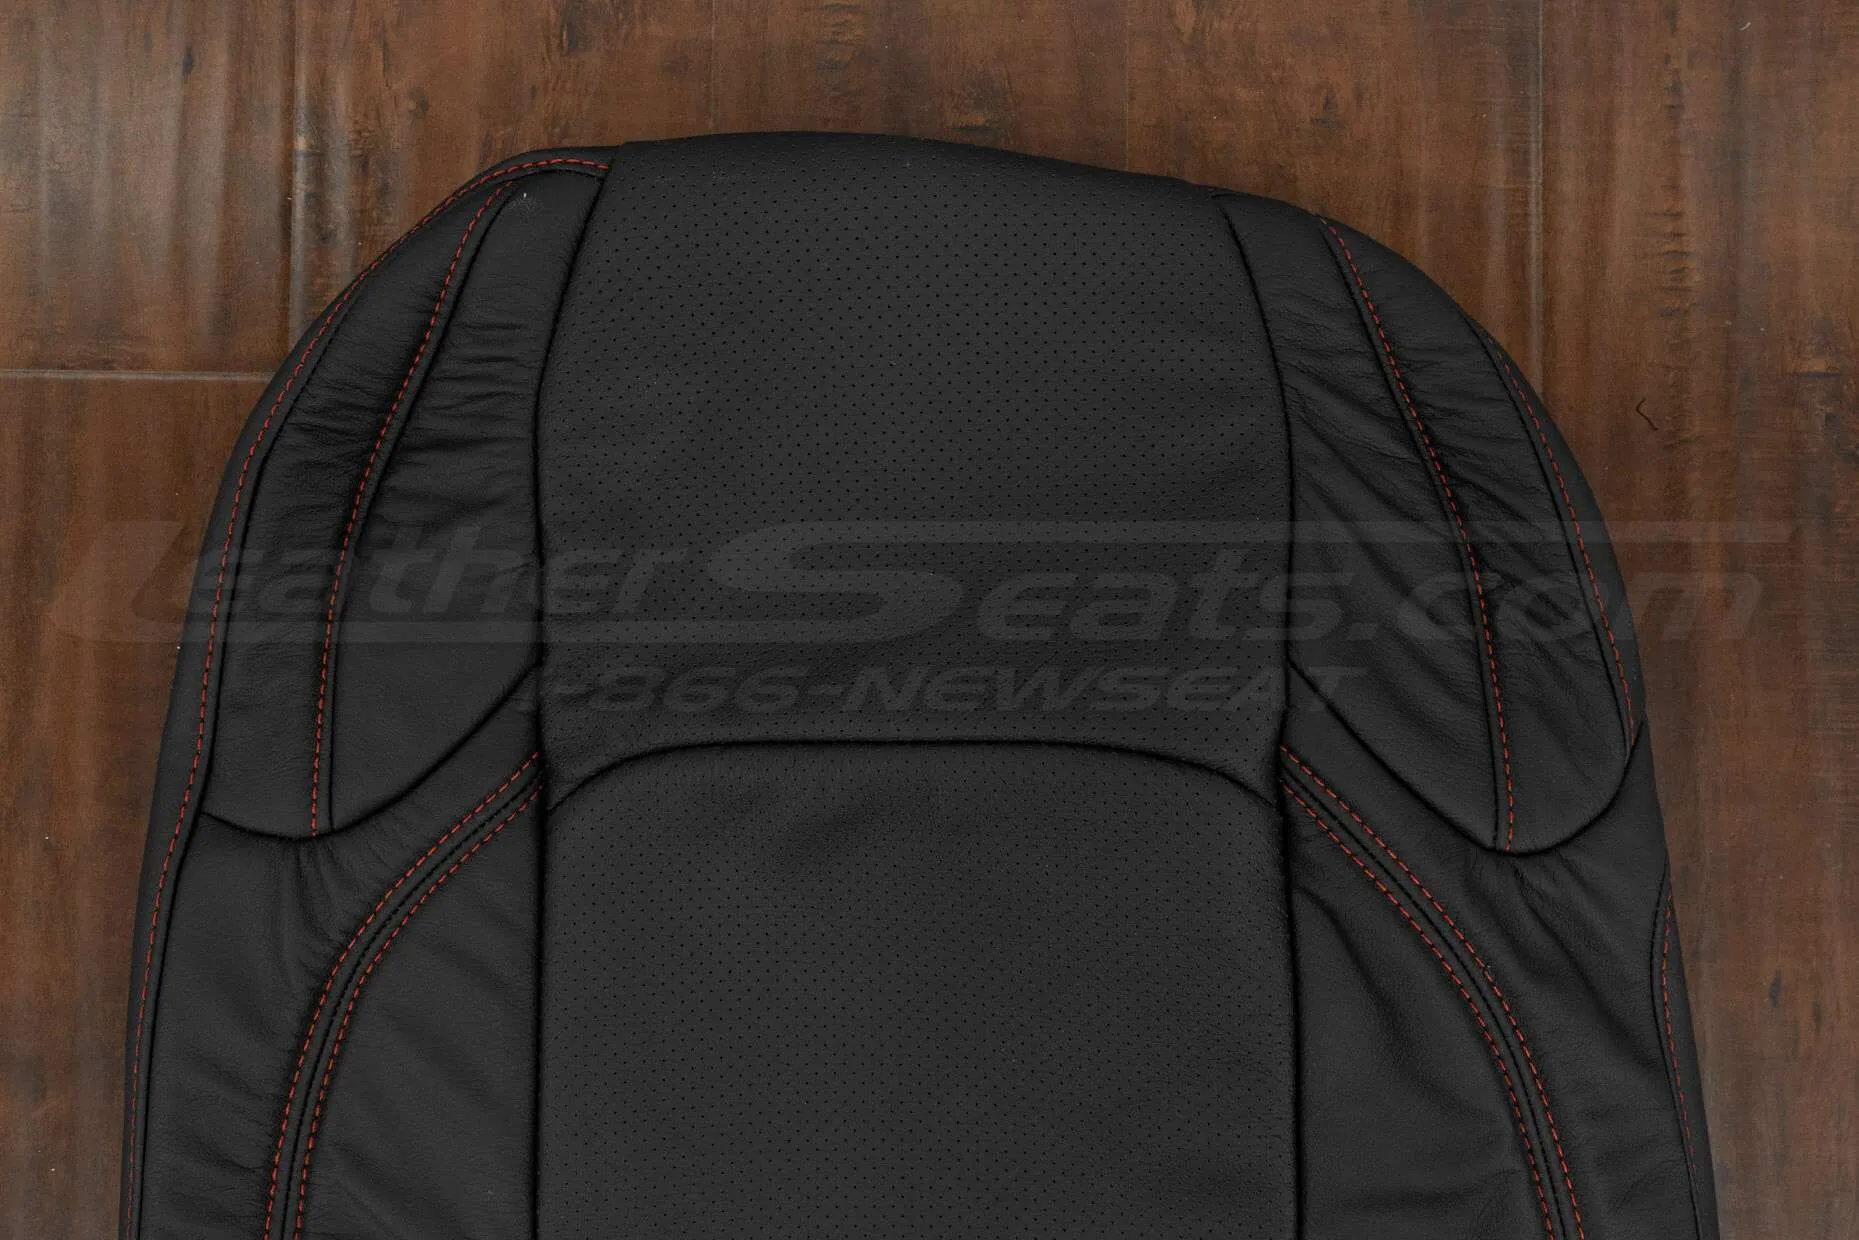 Upper section of front backrest with perforation